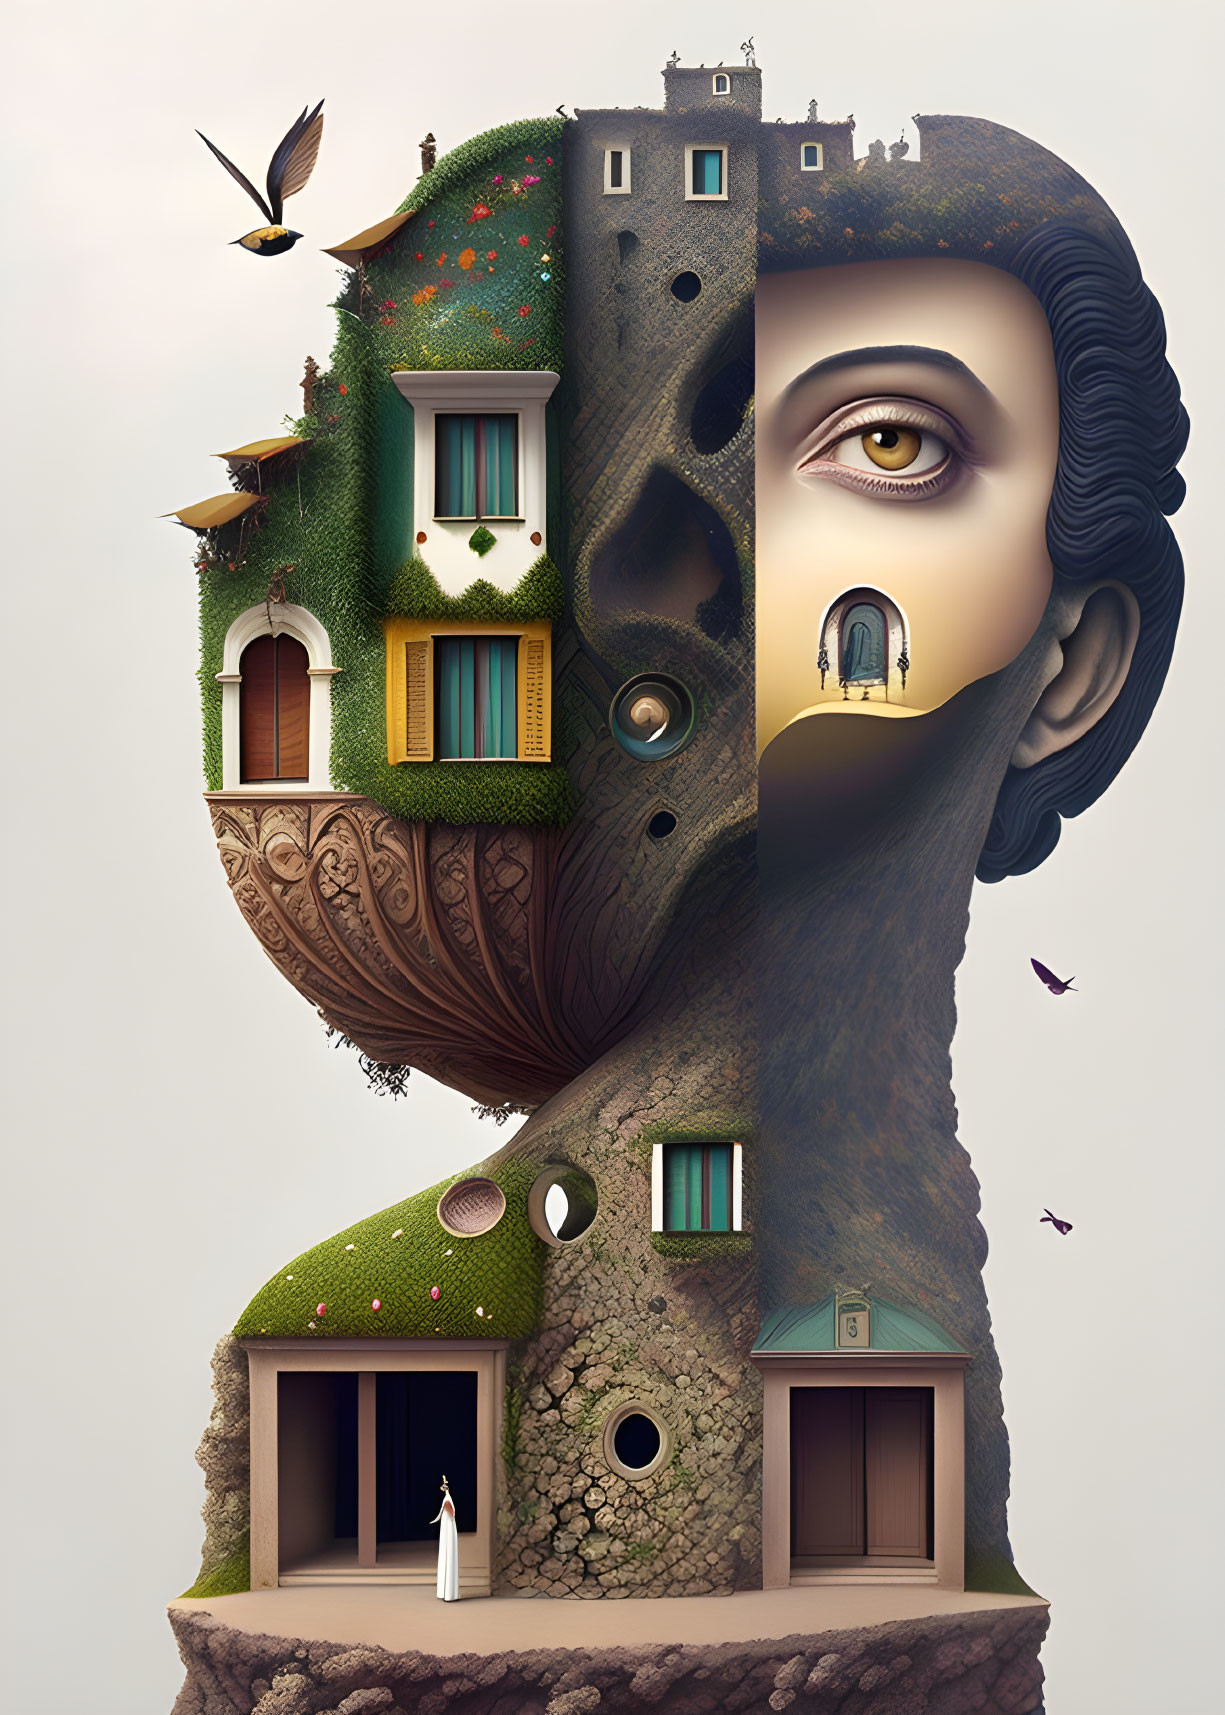 Surreal head-shaped building with floating woman and birds in artistic composition